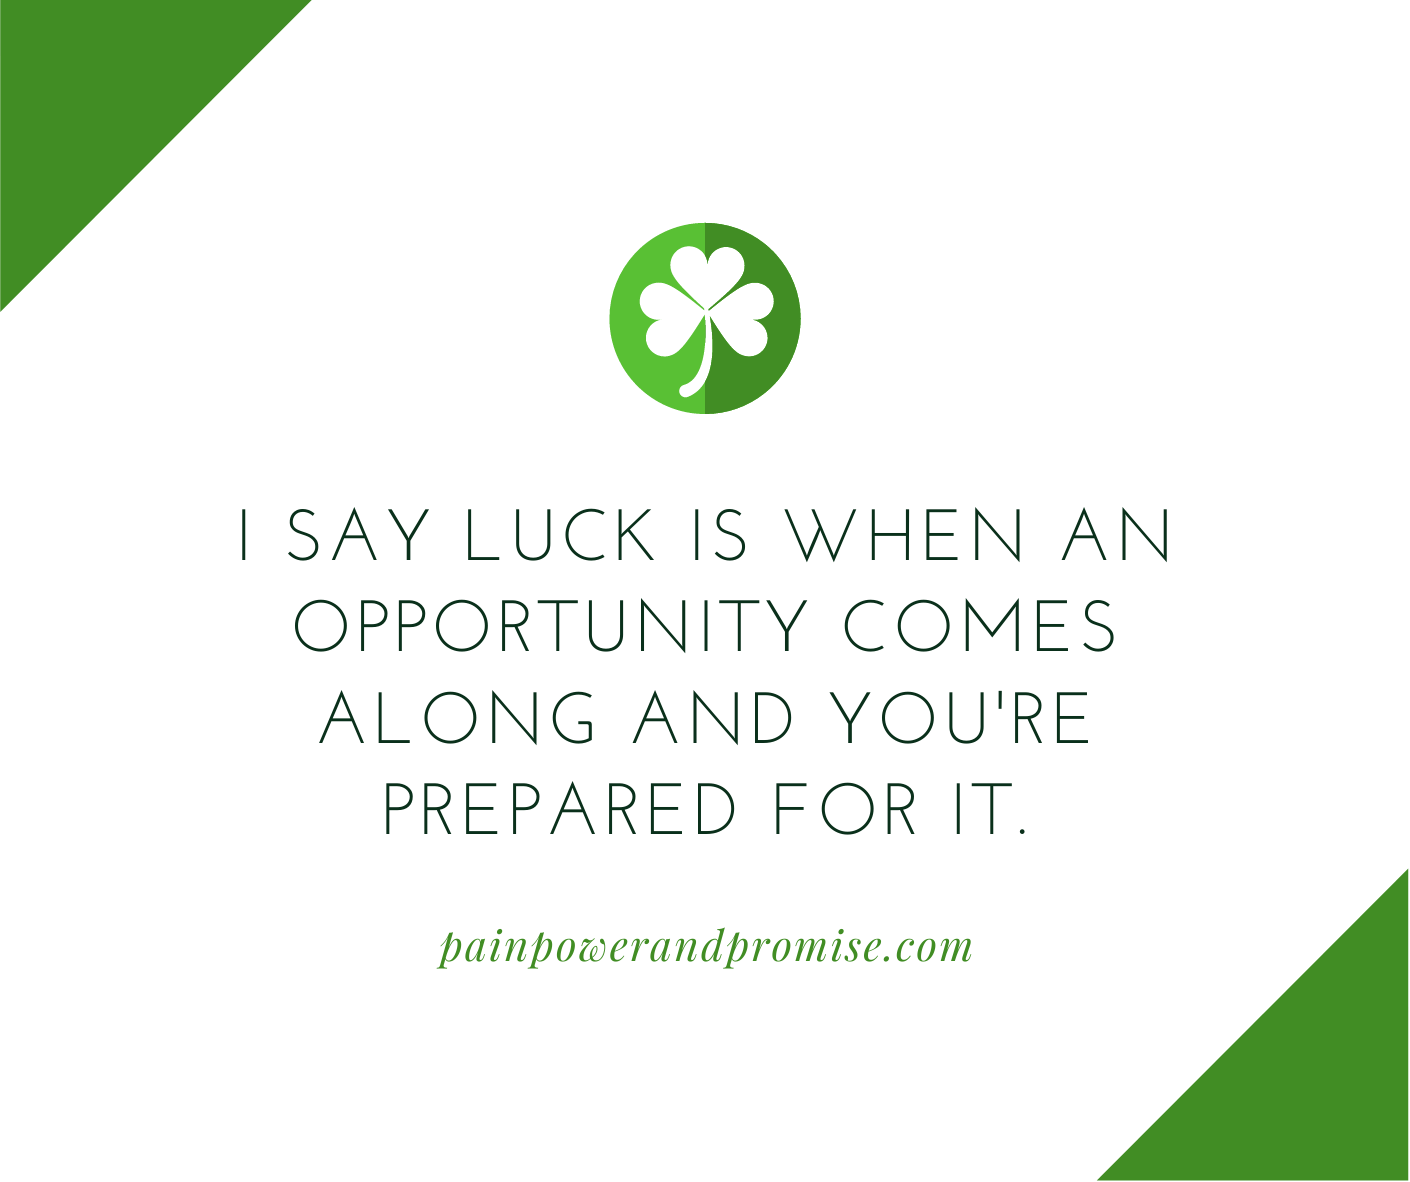 I say Luck is when opportunity comes along and you're prepared for it.